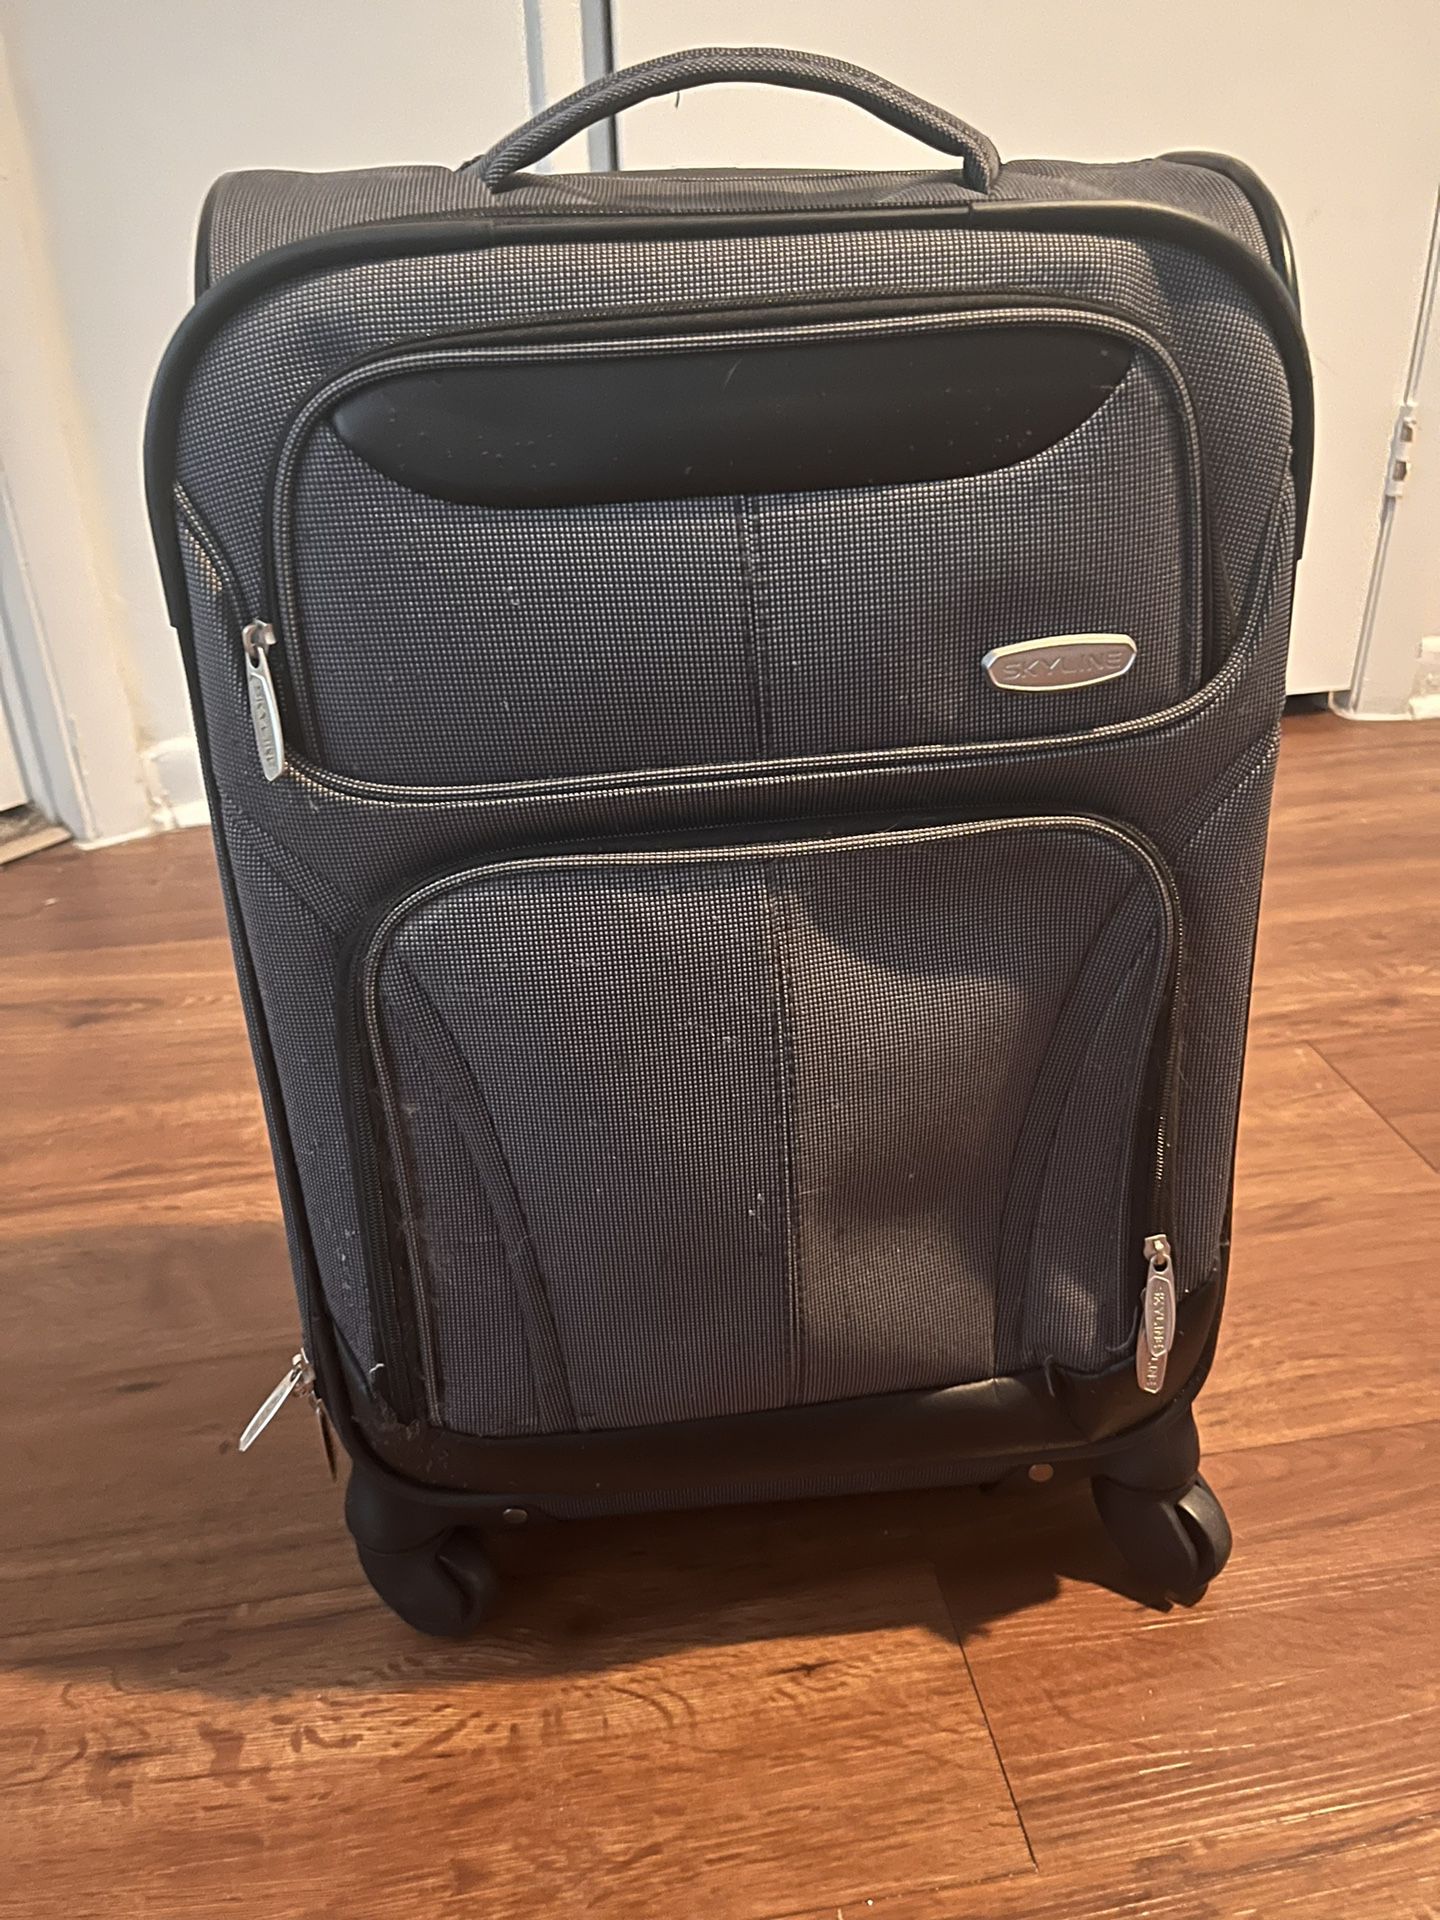 Grey Carry On Suitcase 